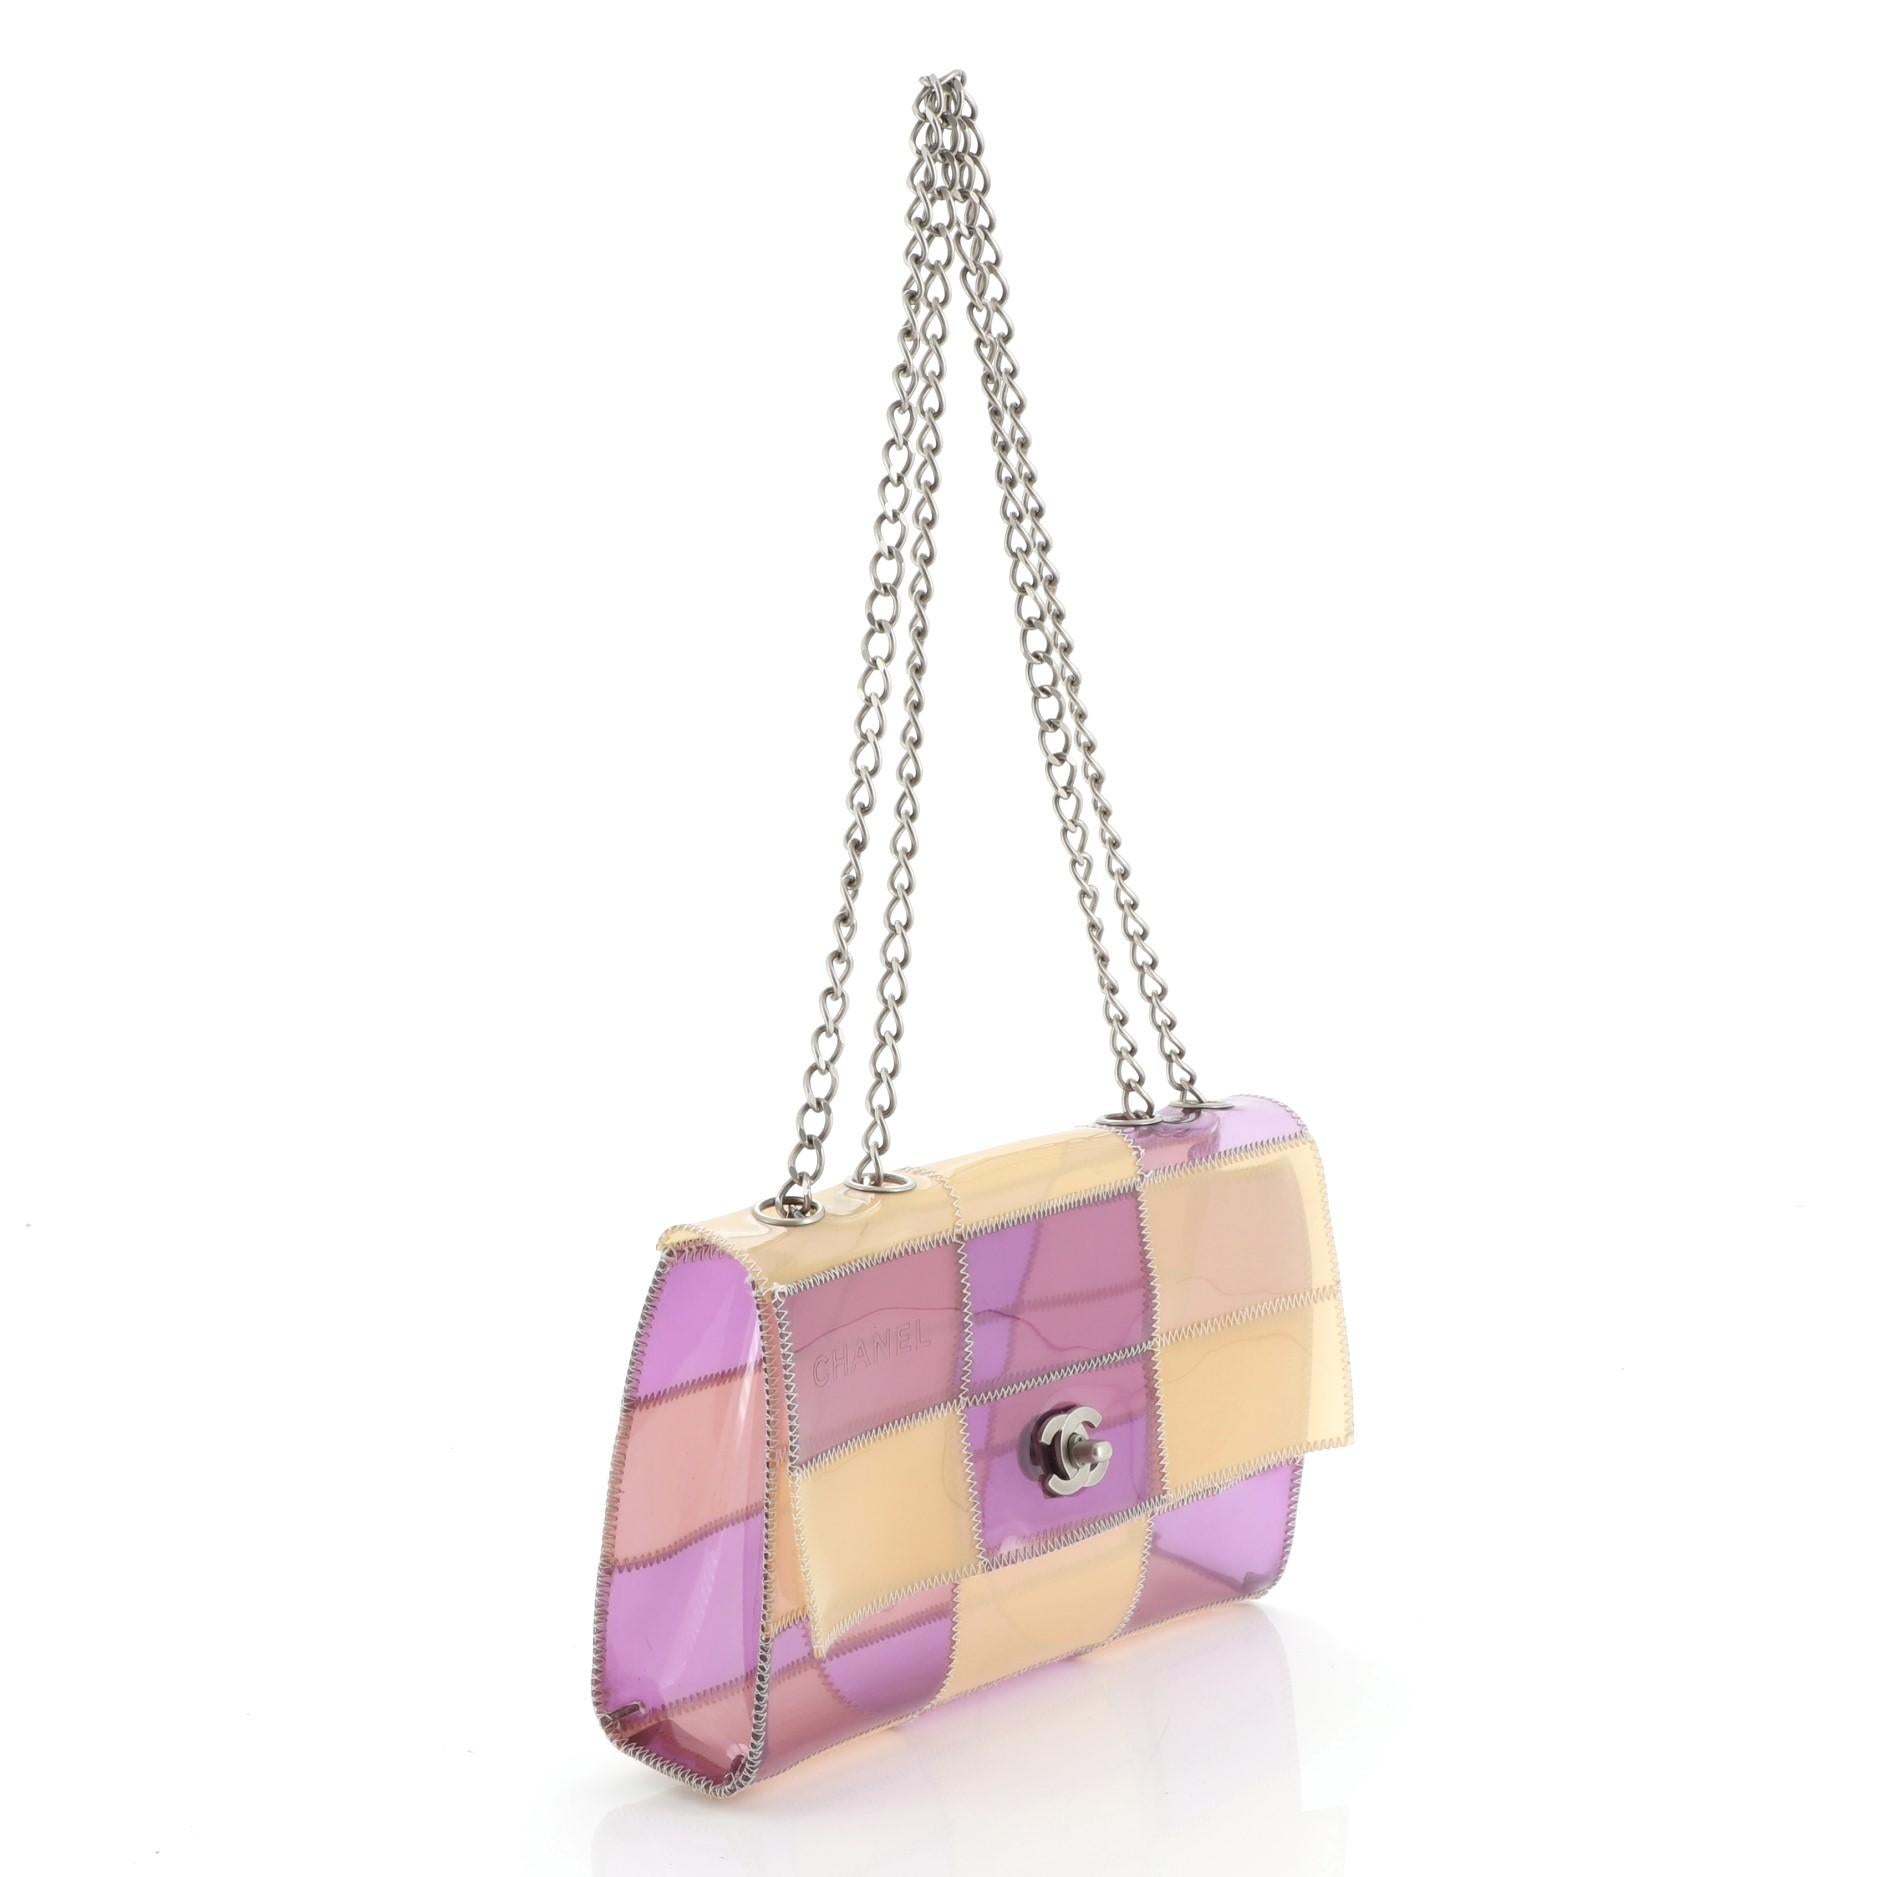 This Chanel Naked Patchwork Flap Bag PVC Medium, crafted in multicolor PVC, features a chain link shoulder strap, frontal flap and silver-tone hardware. Its CC turn-lock closure opens to a multicolor PVC interior. Hologram sticker reads: 5801531.